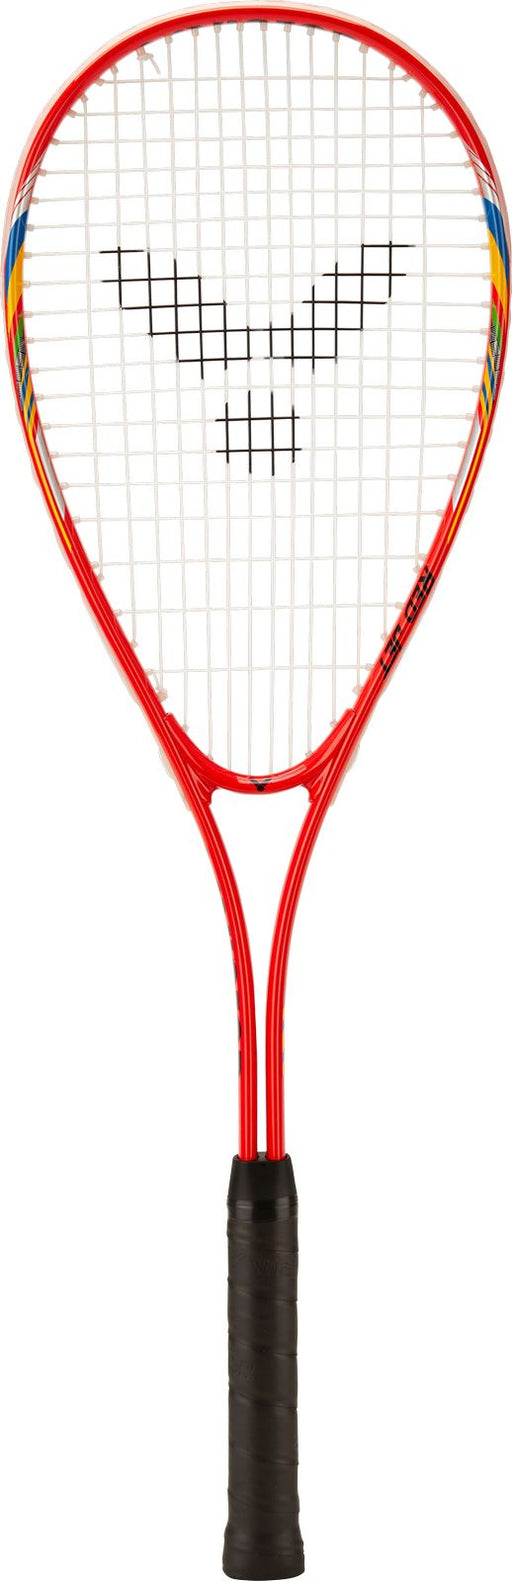 VICTOR VICTOR Red Jet Squash Racket 5004 Fiery Coral